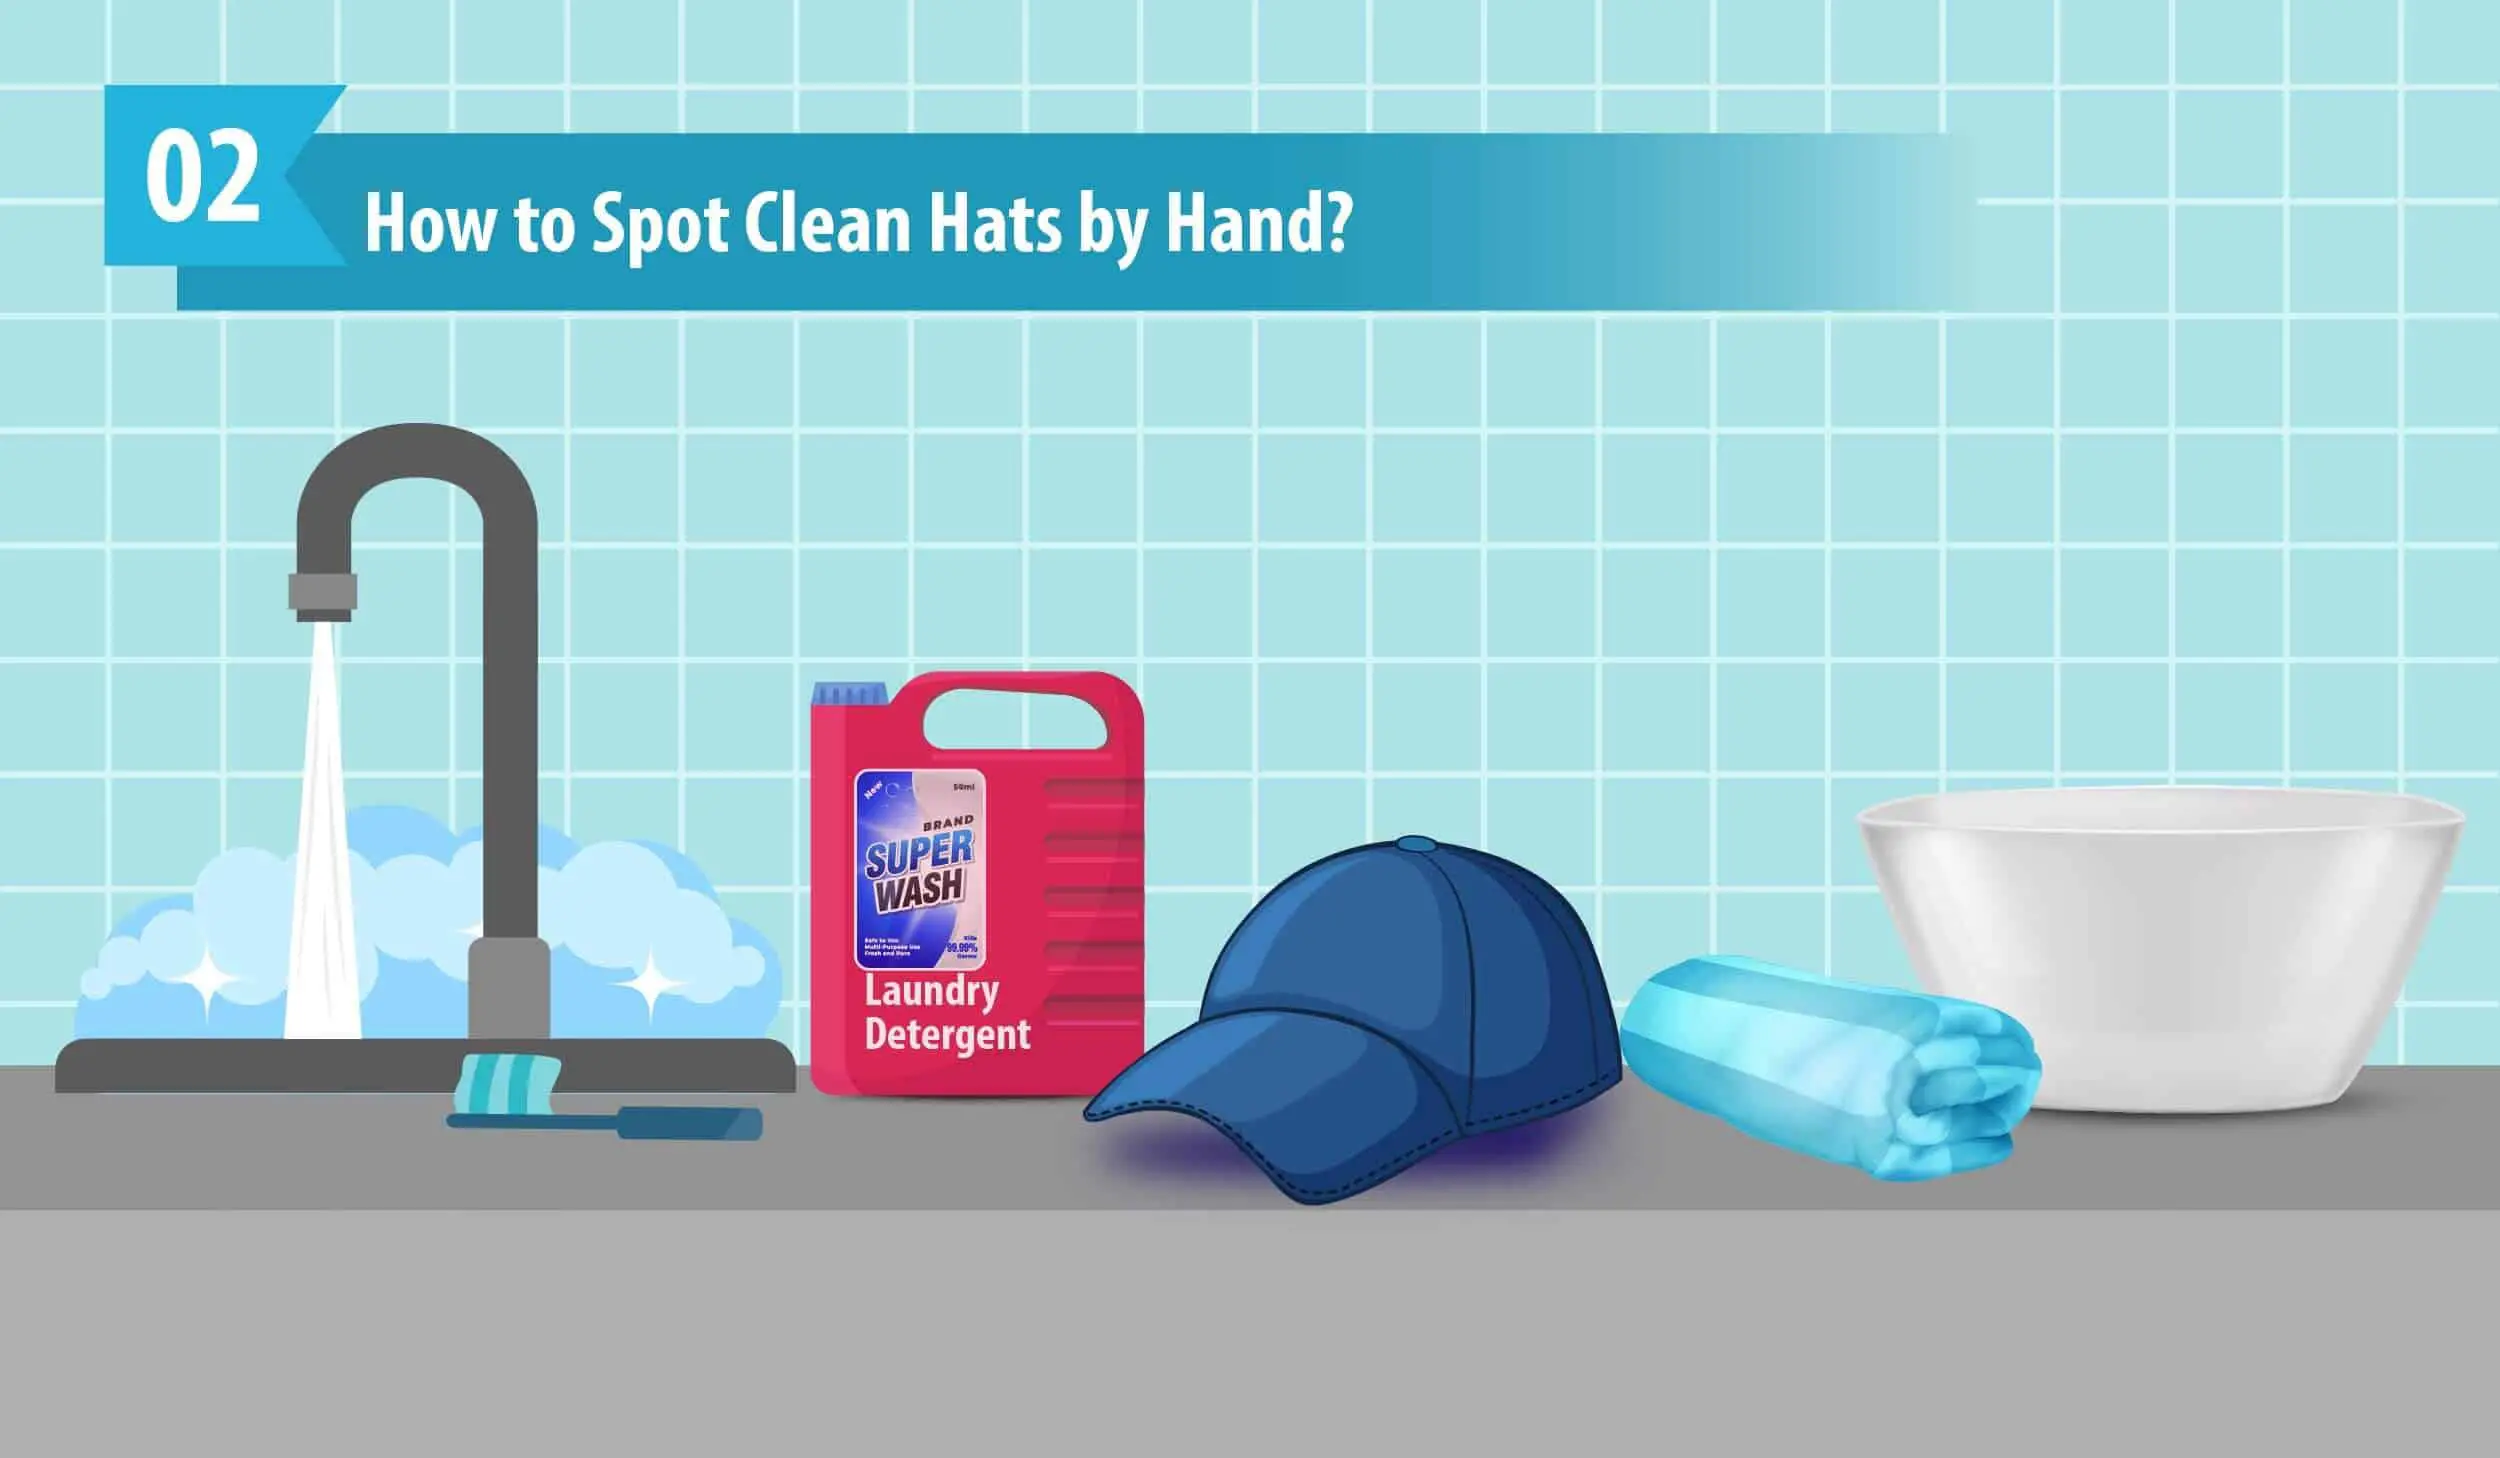 How to Spot Clean Hats by Hand